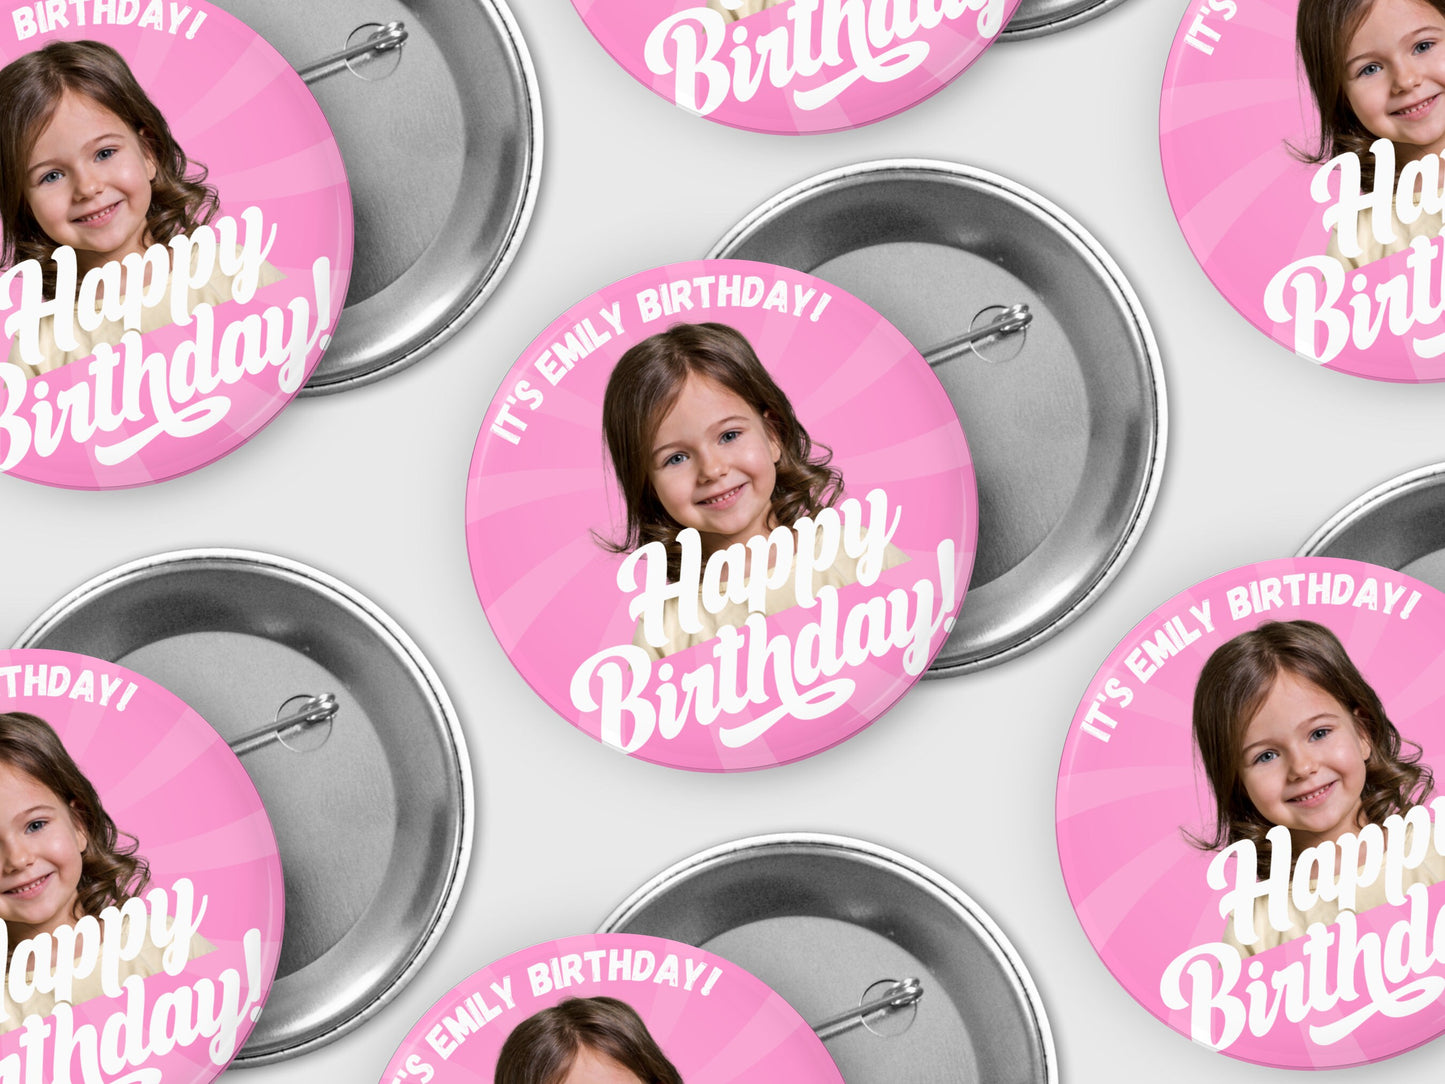 PINK BIRTHDAY PINBACK Template,Full Color| Personalized Funeral Buttons|Pinback Button Template|Keepsake Pin Backs Template